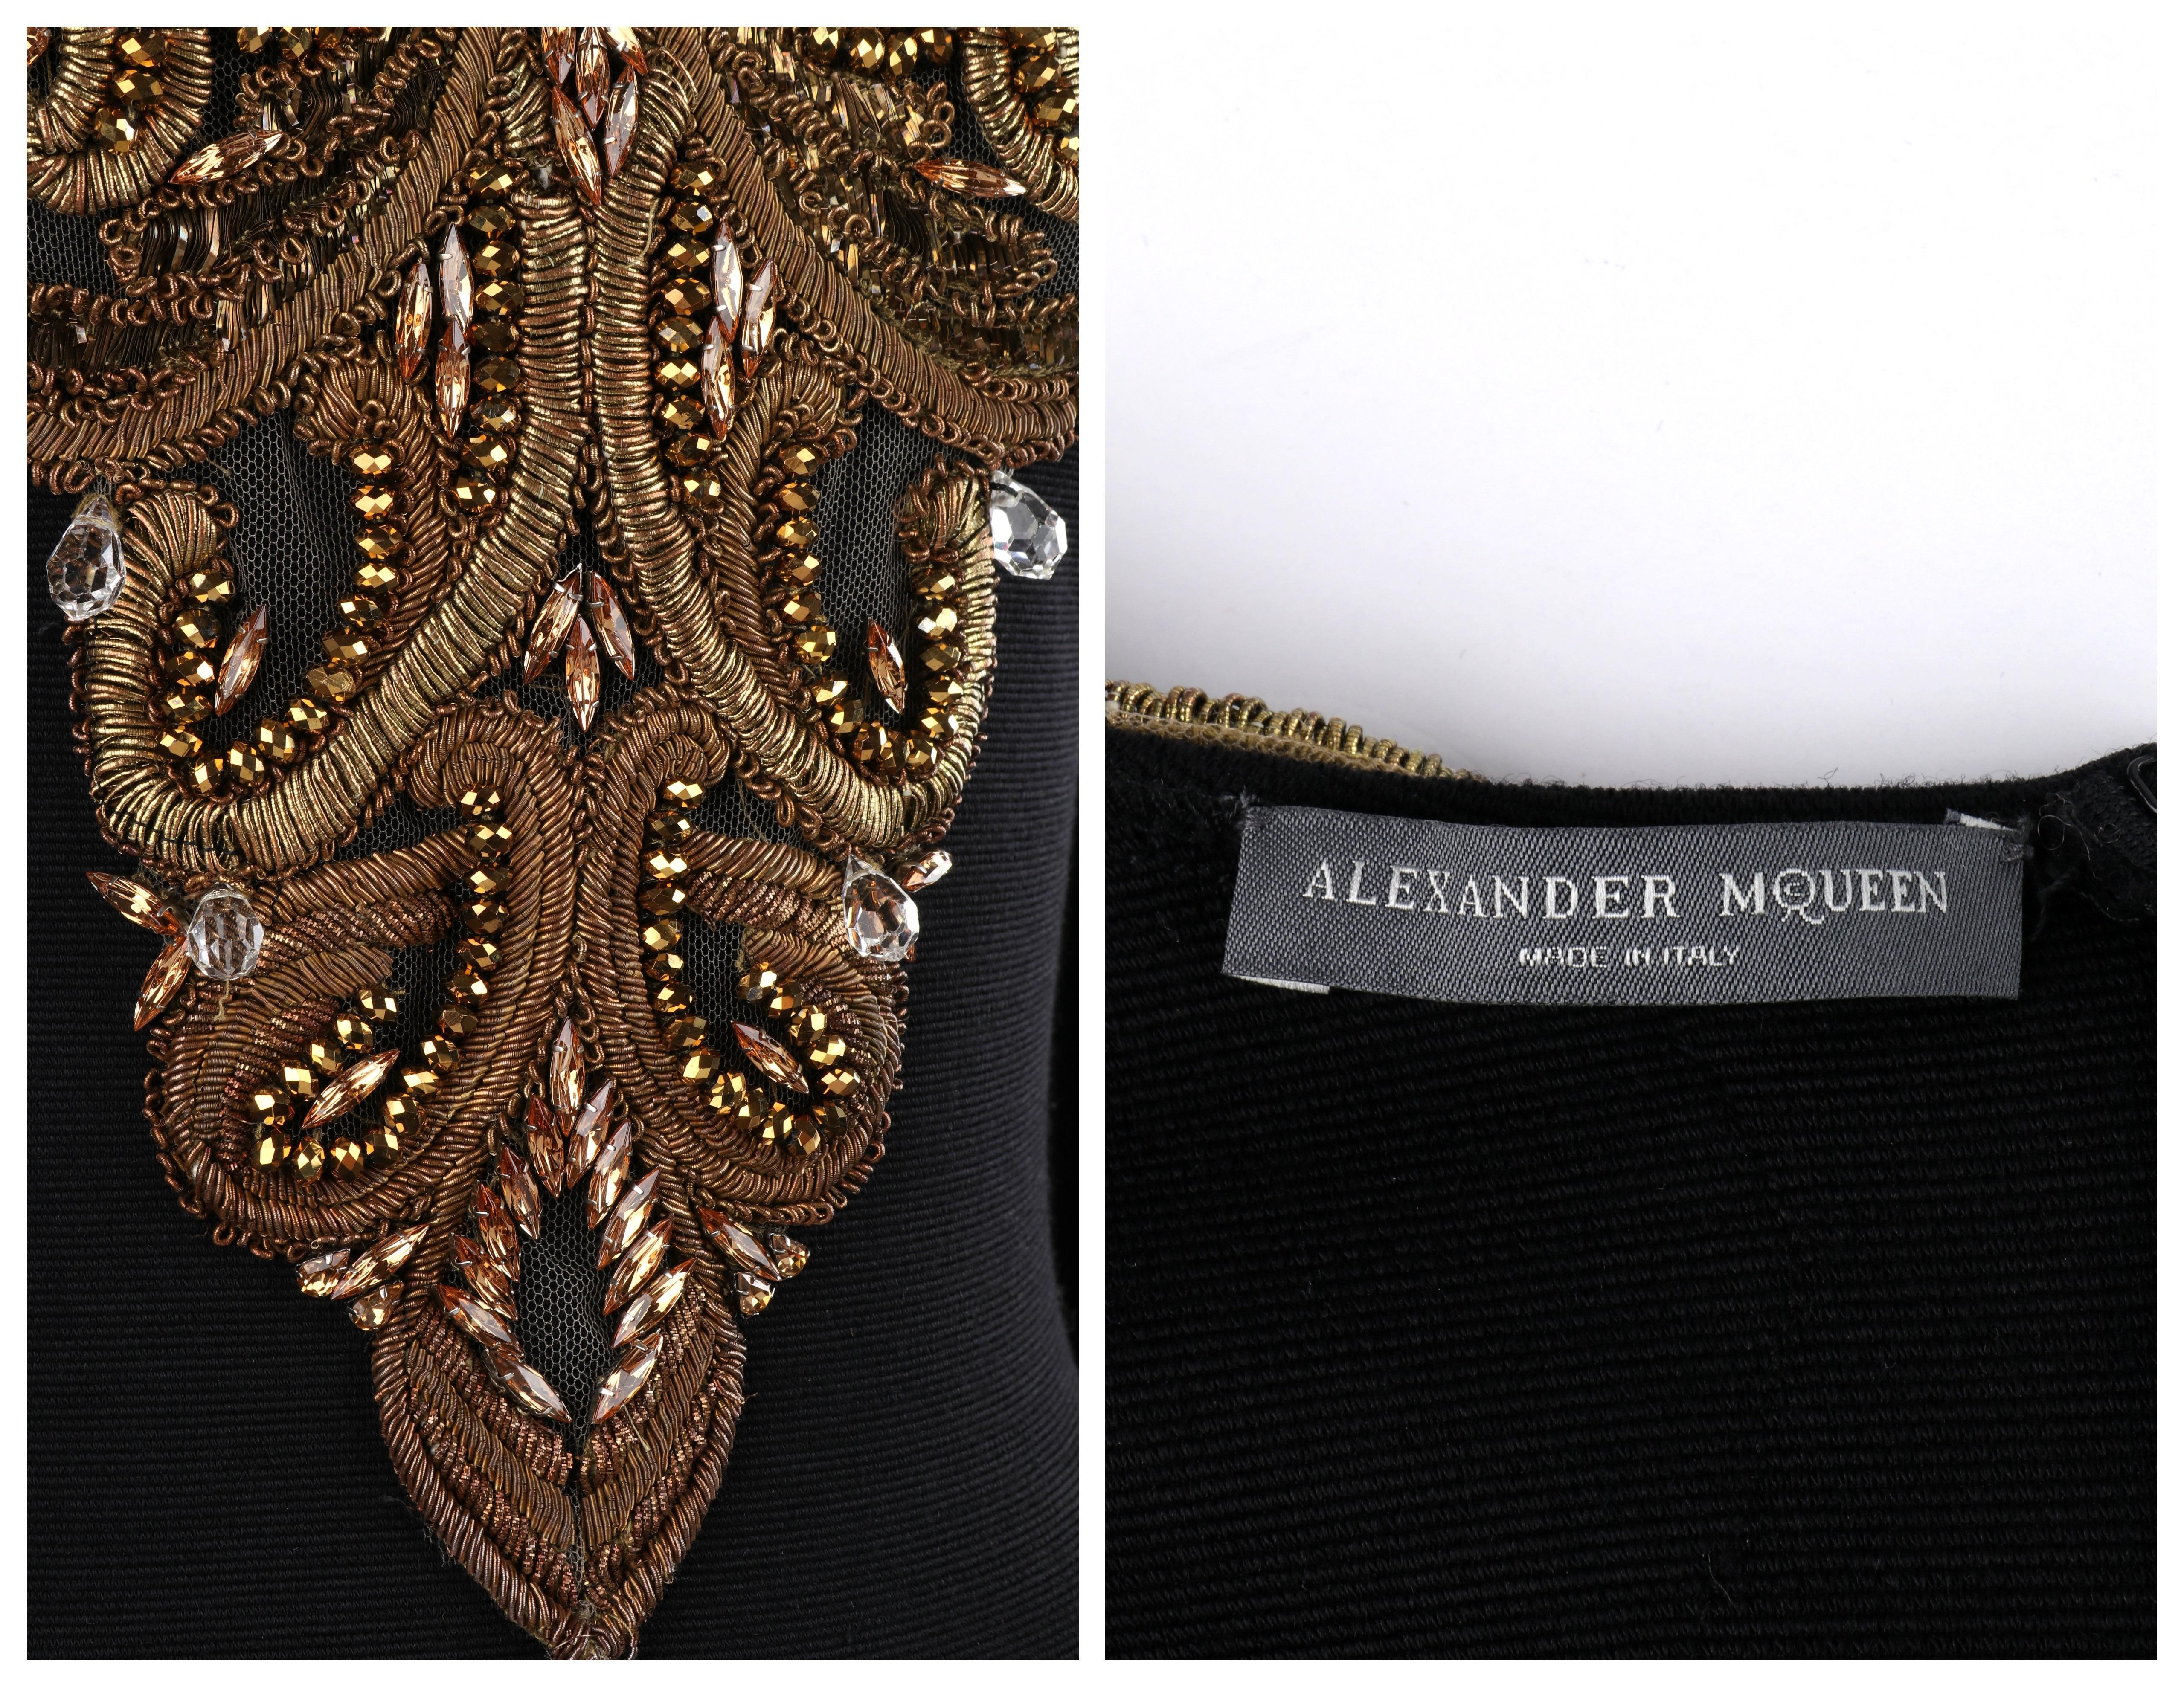 ALEXANDER McQUEEN A/W 2010 “Angels & Demons” Black Gold Beaded Fit n Flare Dress For Sale 3